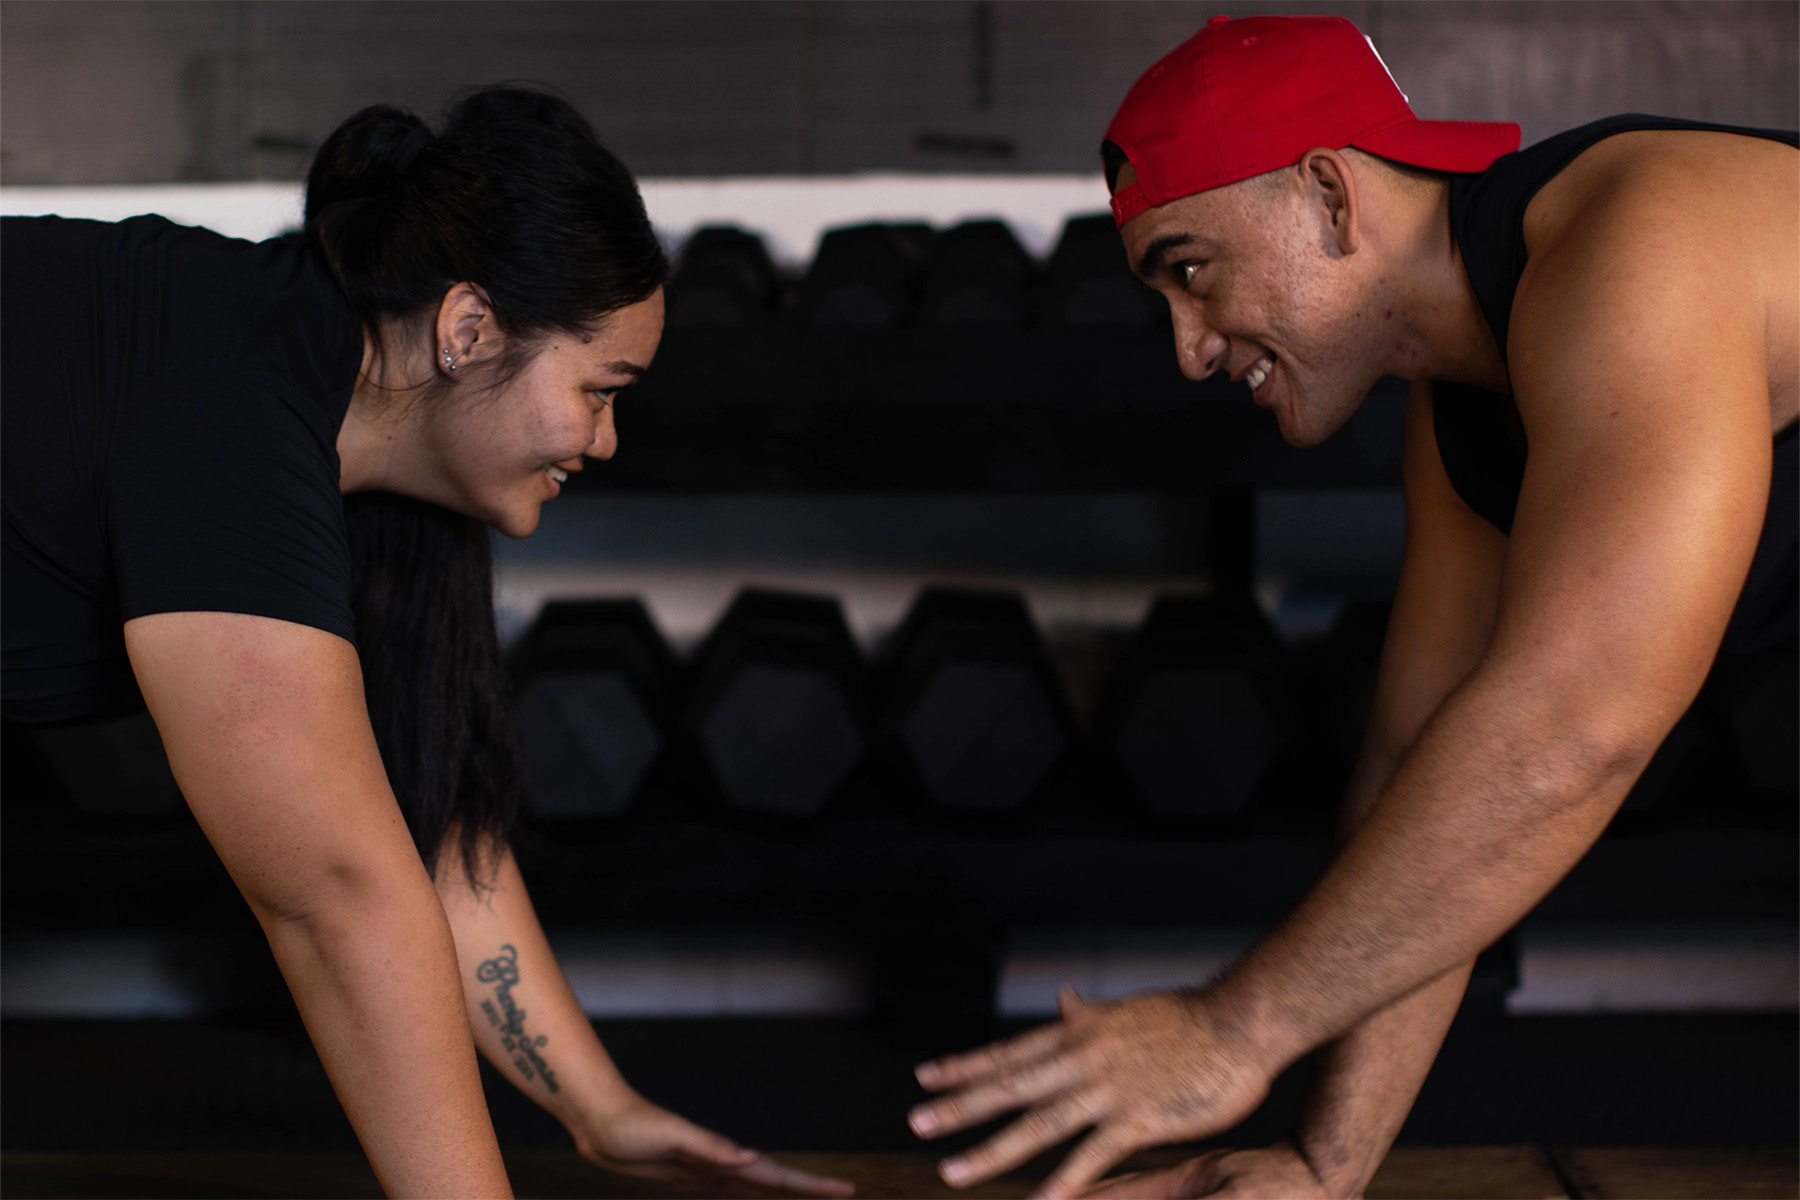 Cooks couple sharing wellbeing dream with Polynesians globally